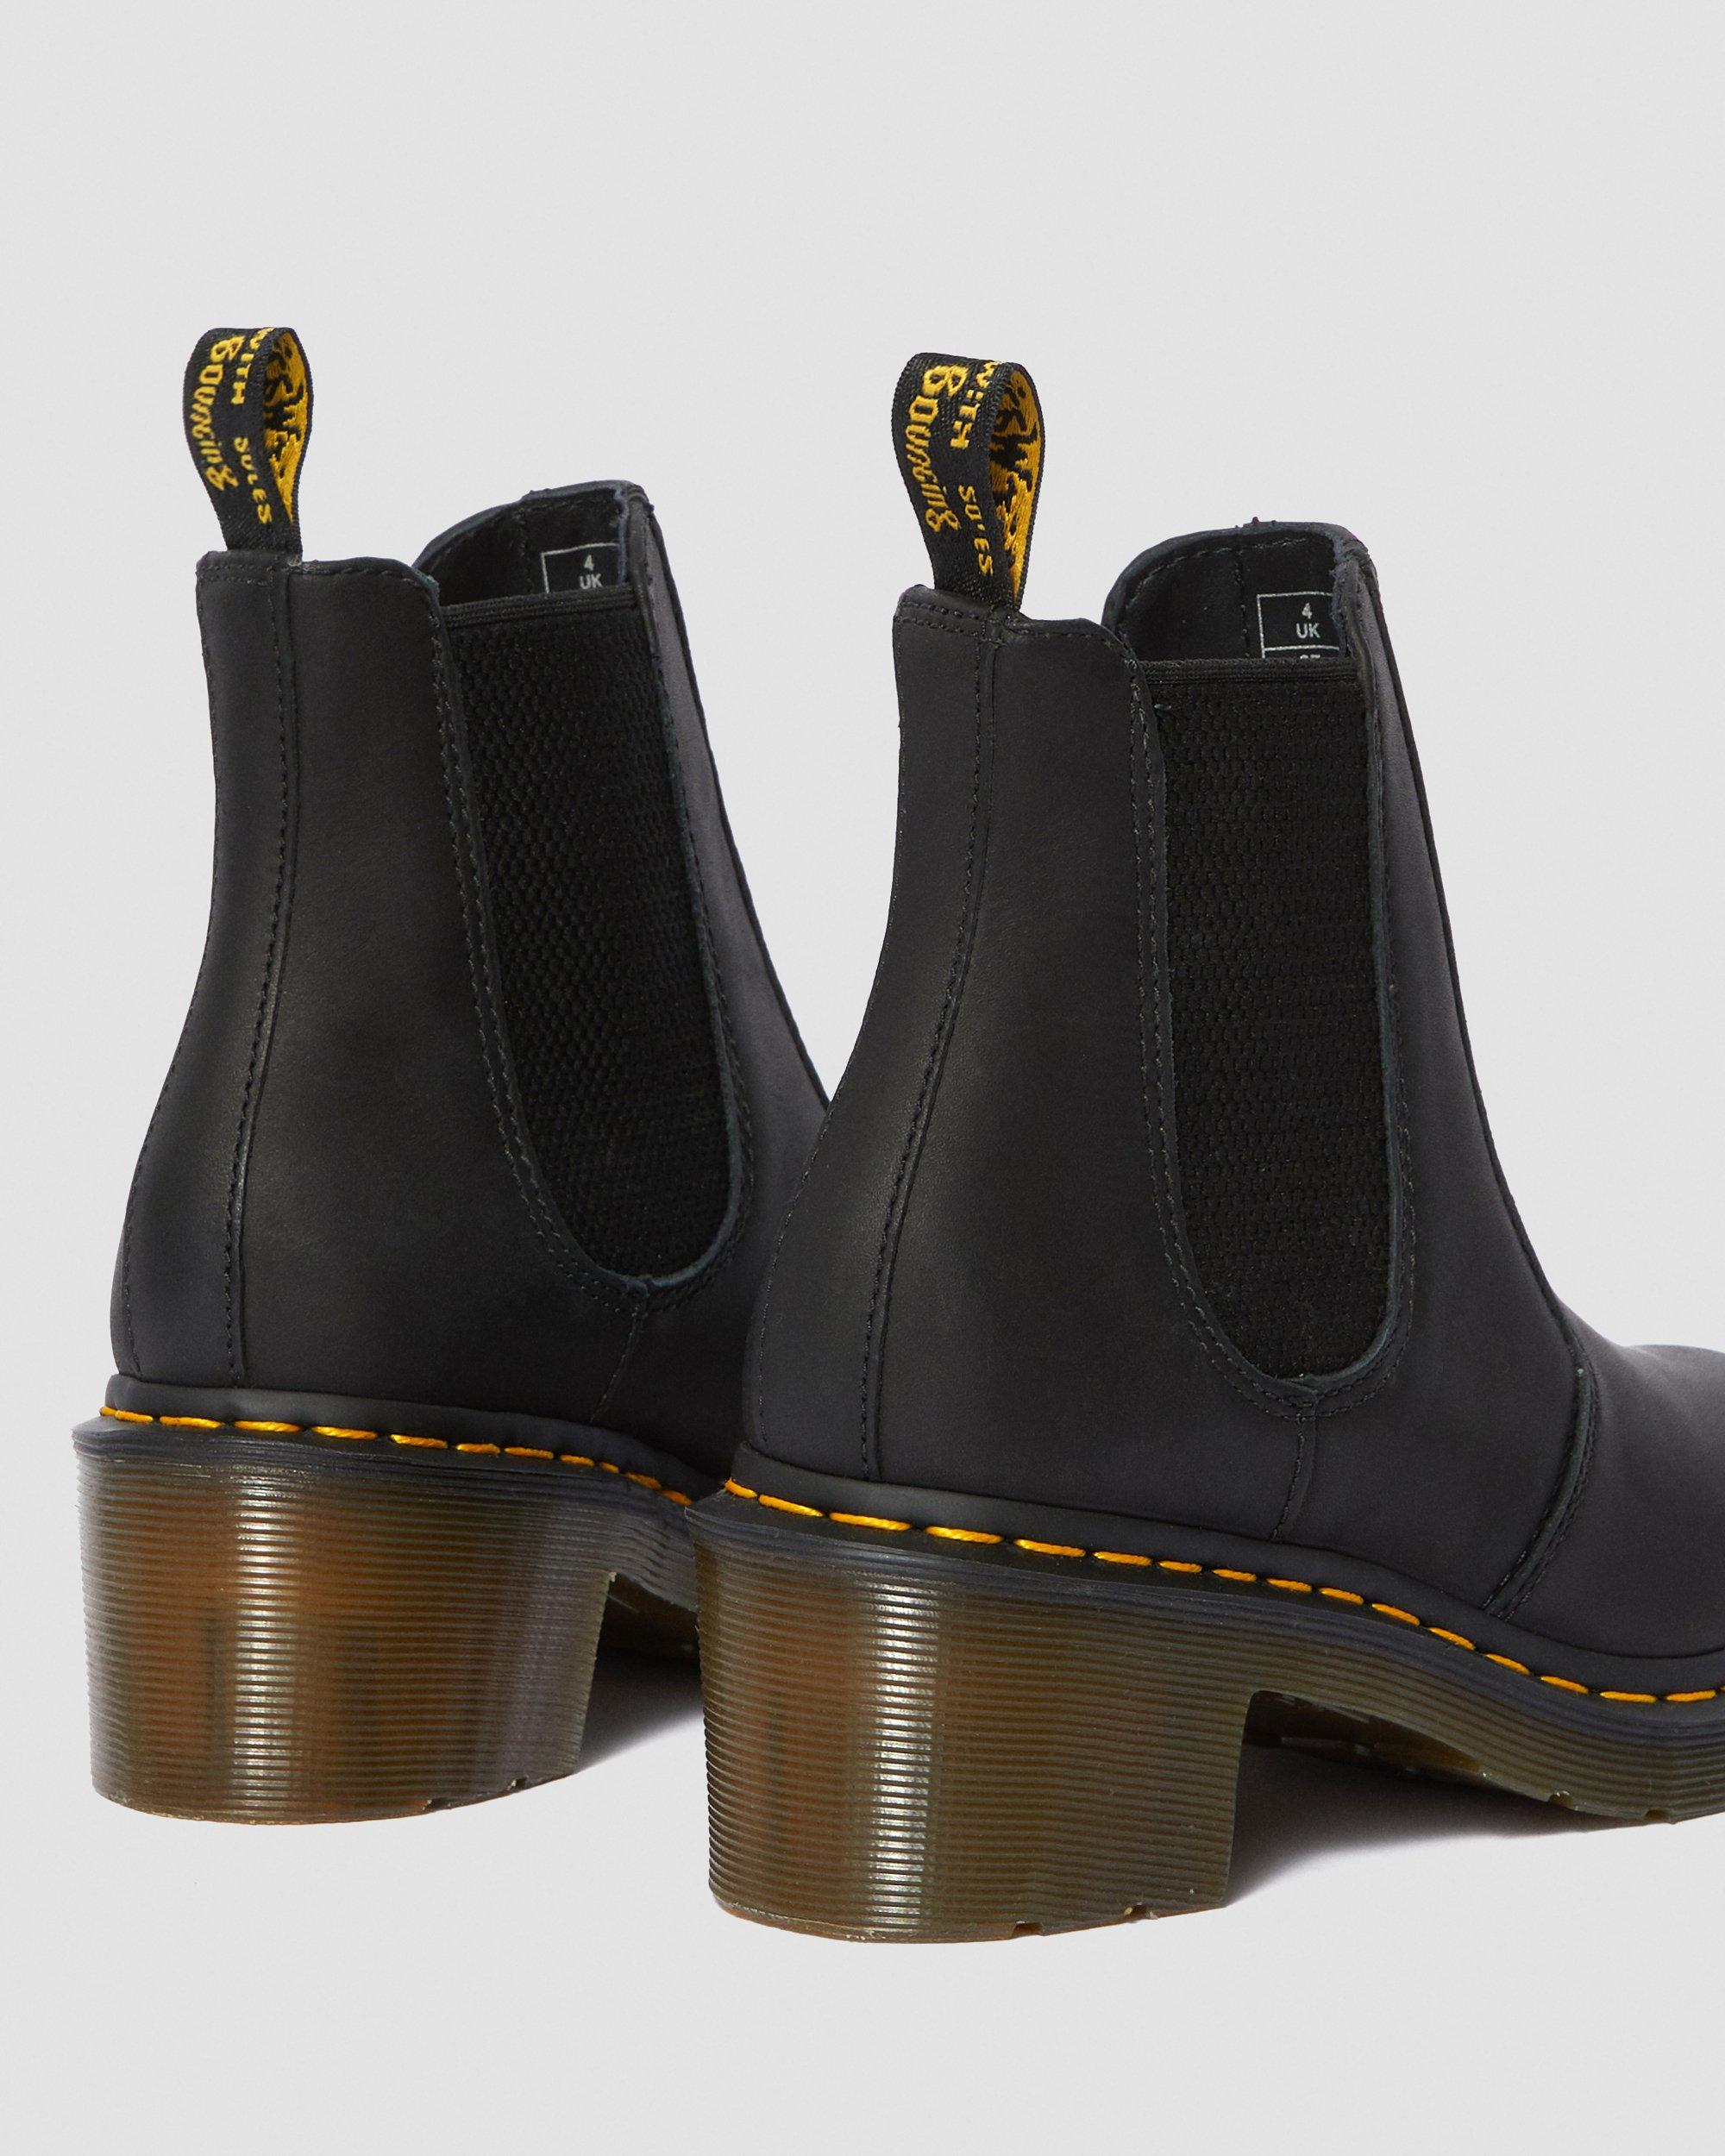 Cadence Greasy Heeled Chelsea Boots in Black